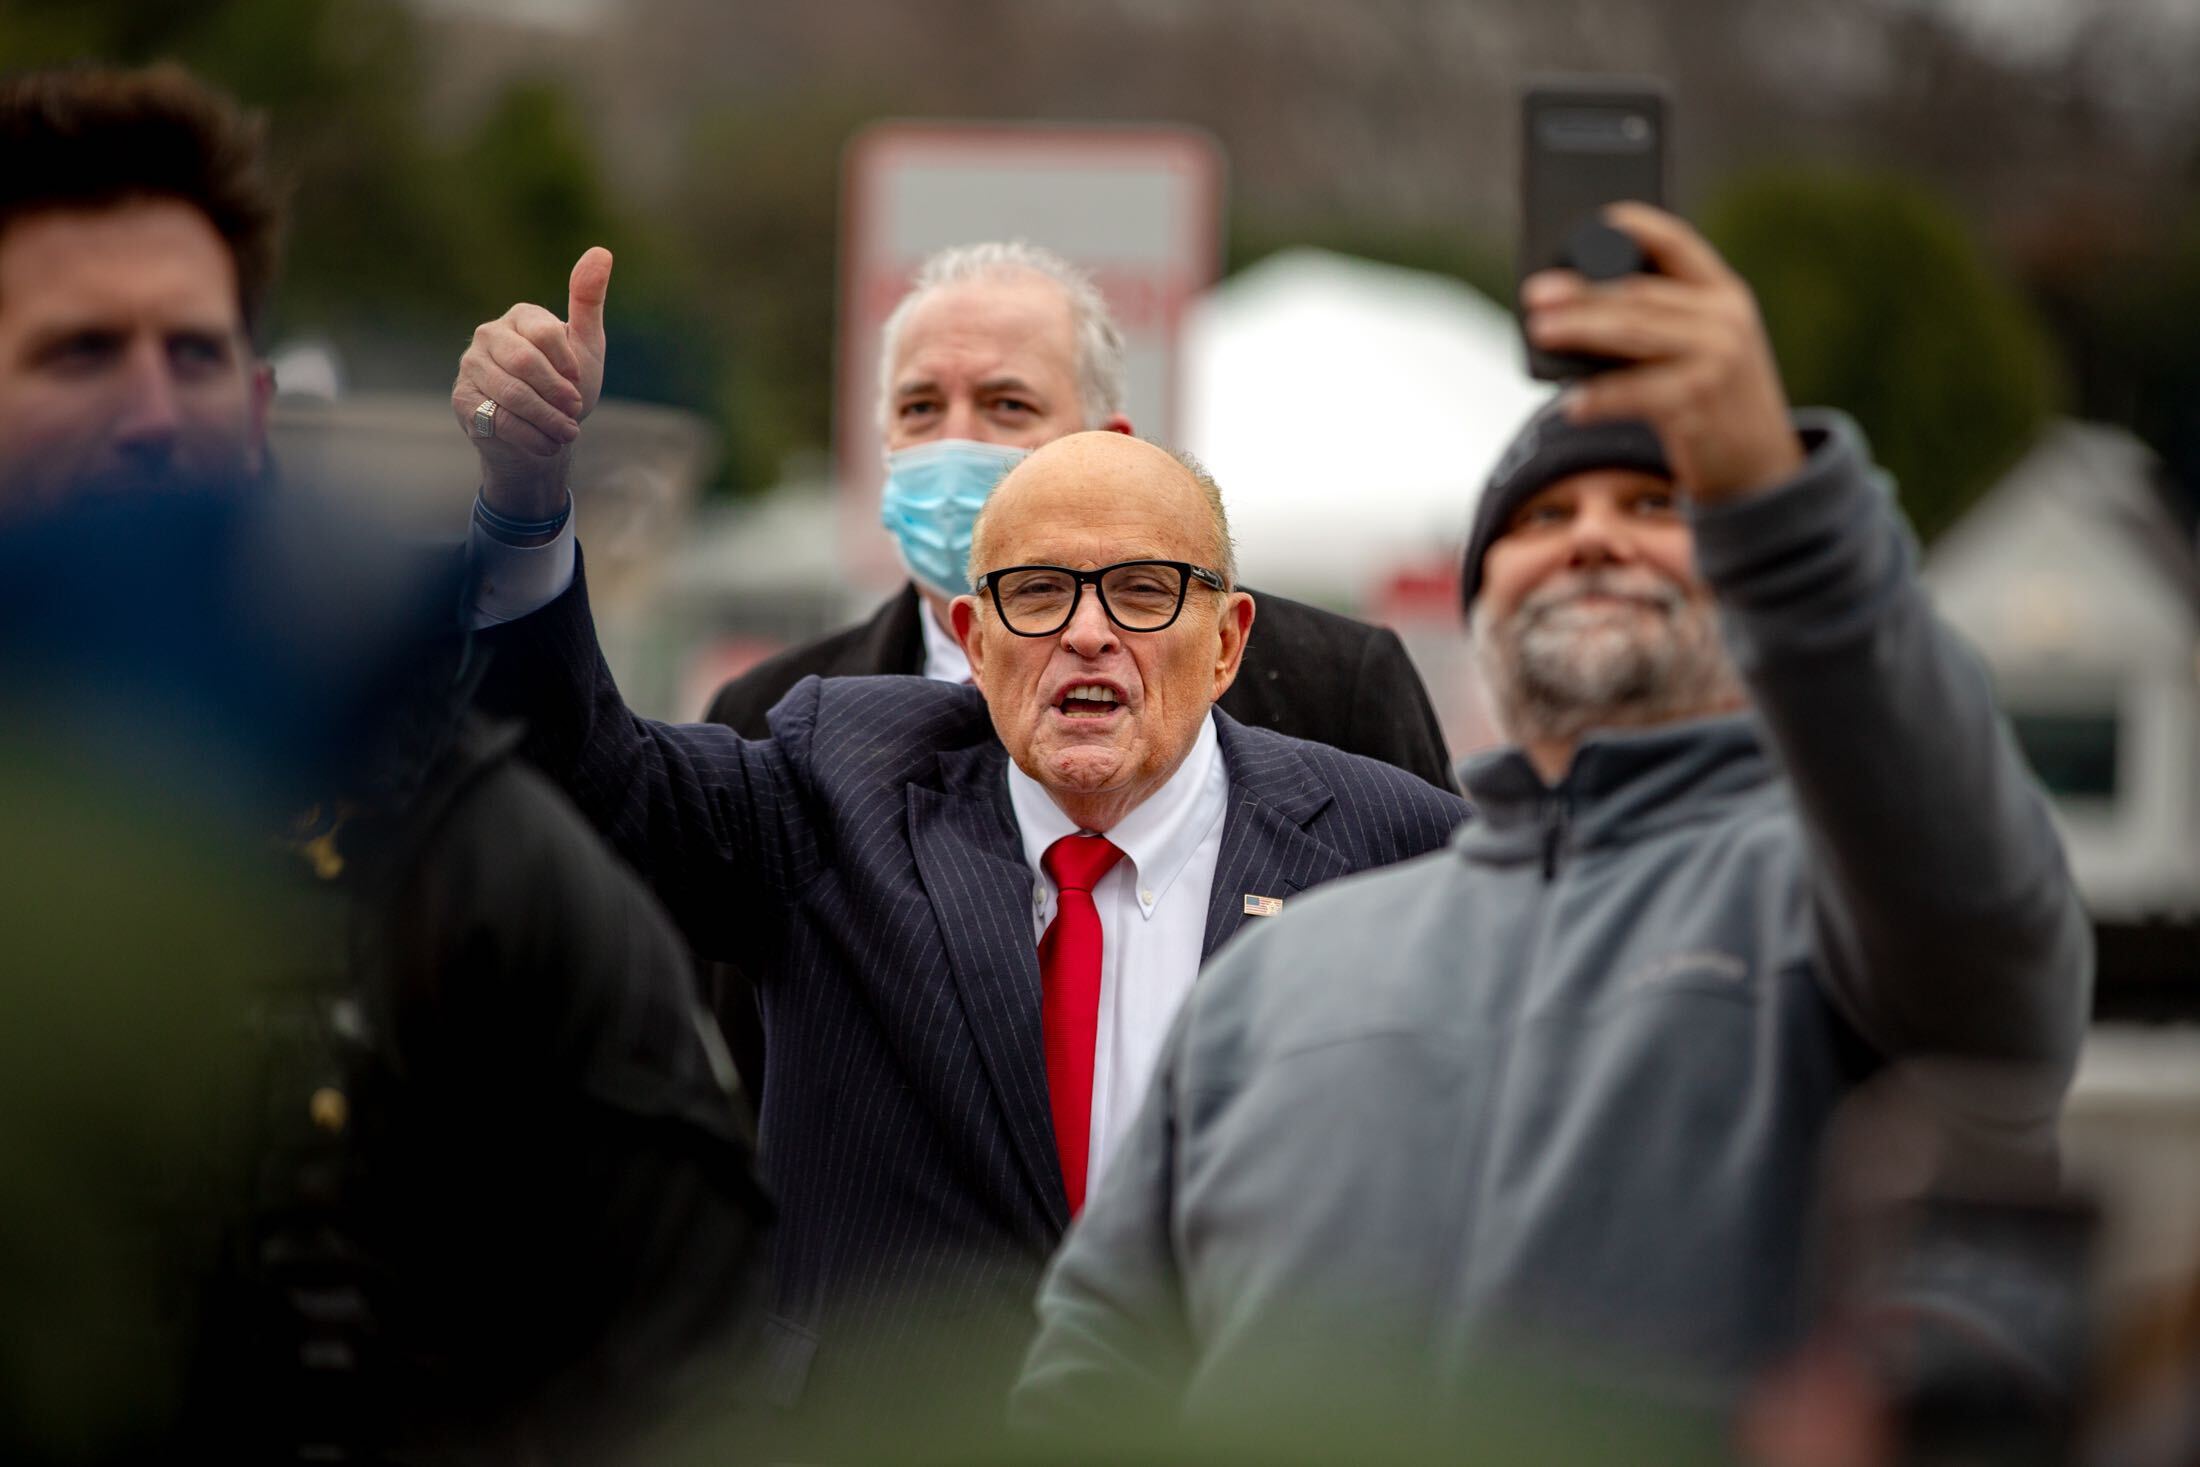 A Trump supporter snaps a selfie with Rudy Giuliani.